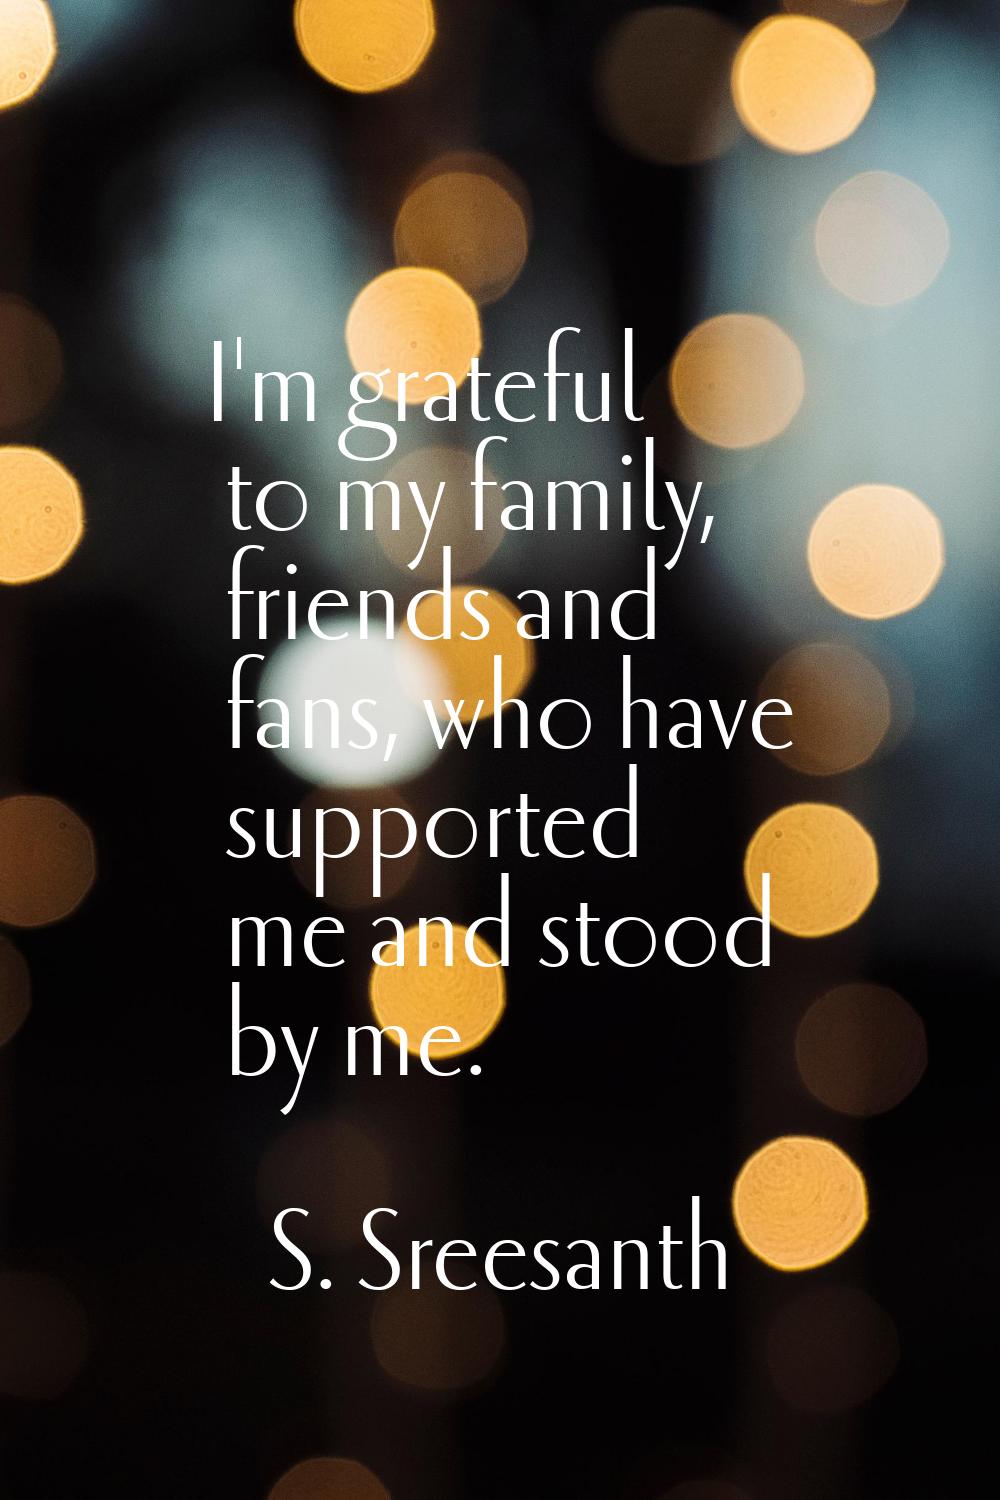 I'm grateful to my family, friends and fans, who have supported me and stood by me.